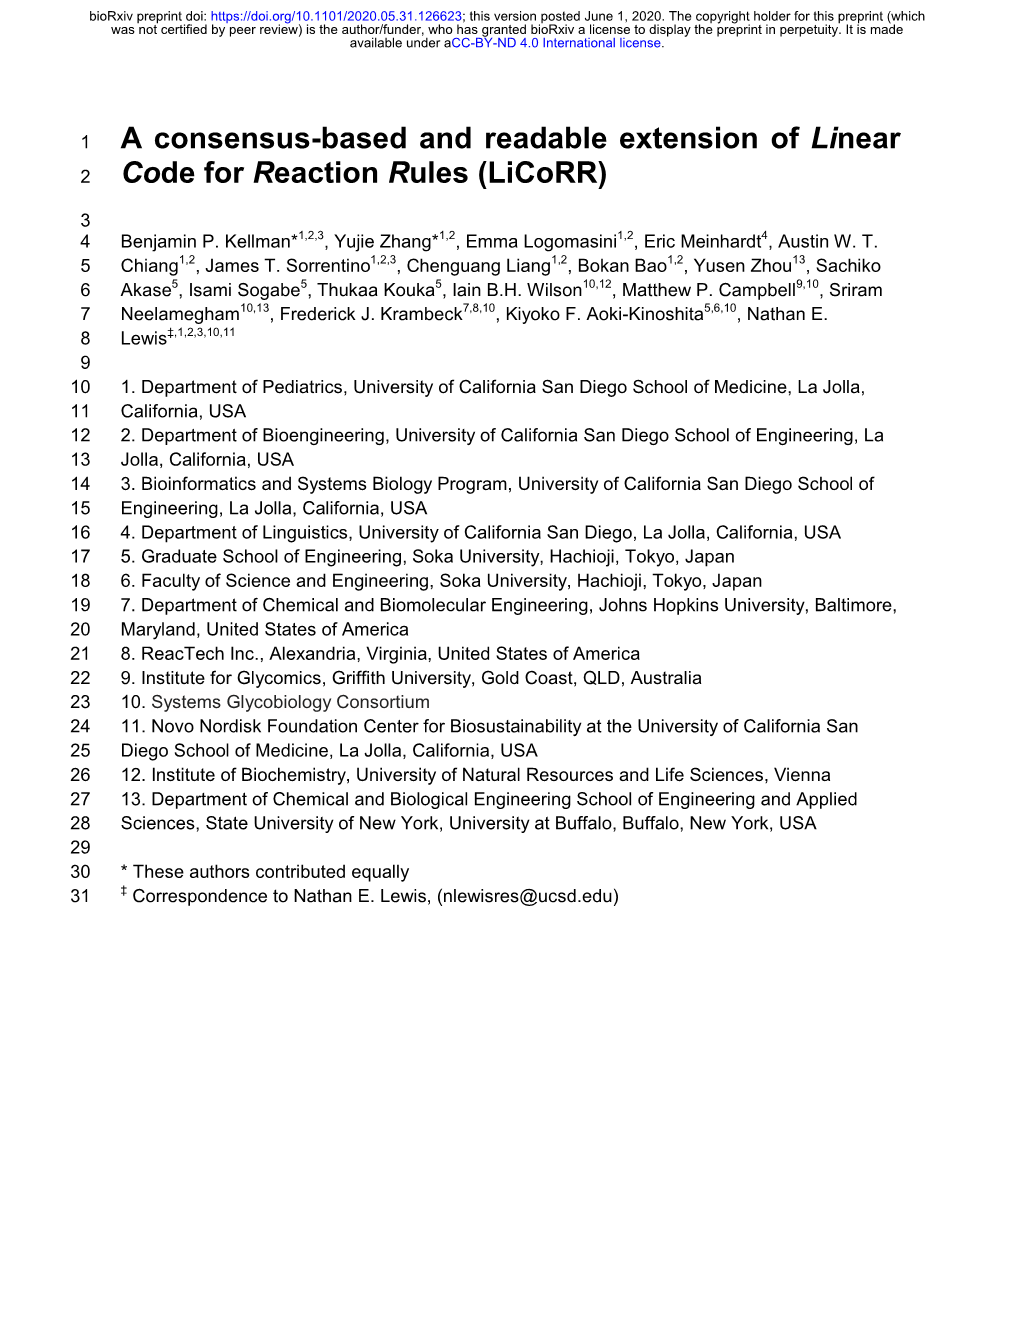 A Consensus-Based and Readable Extension of Linear Code For